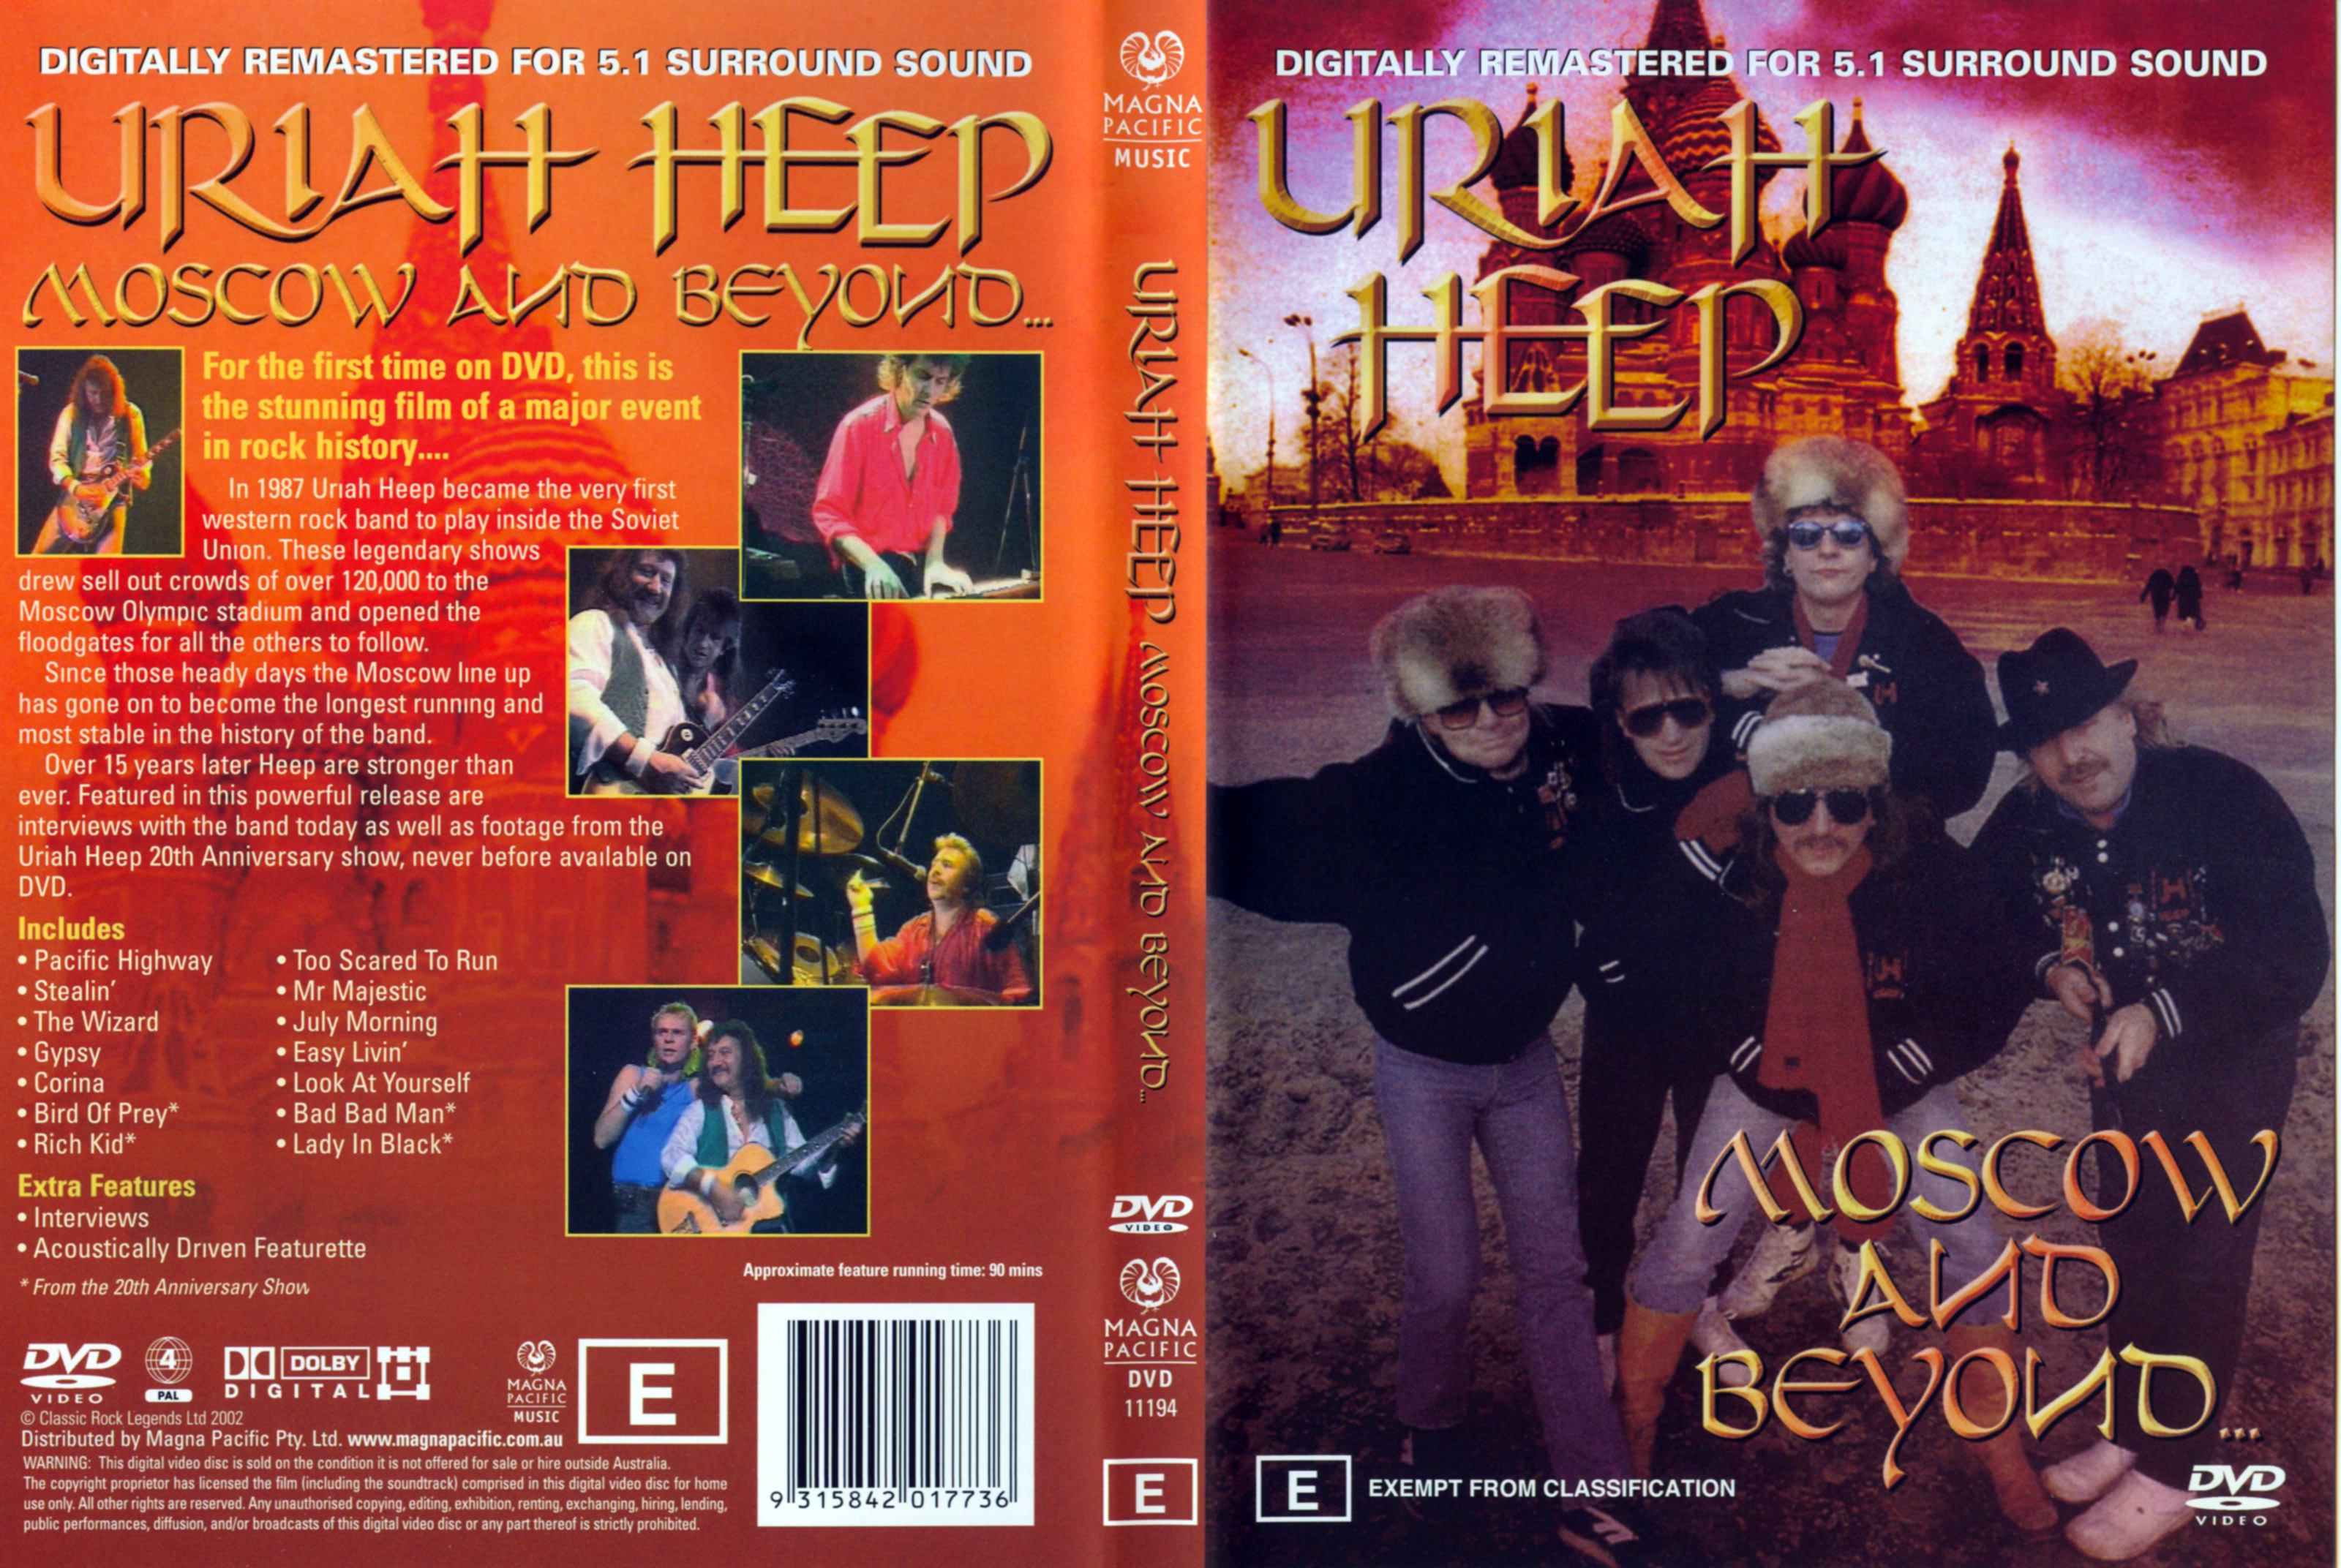 Jaquette DVD Uriah Heep - Moscow and beyond